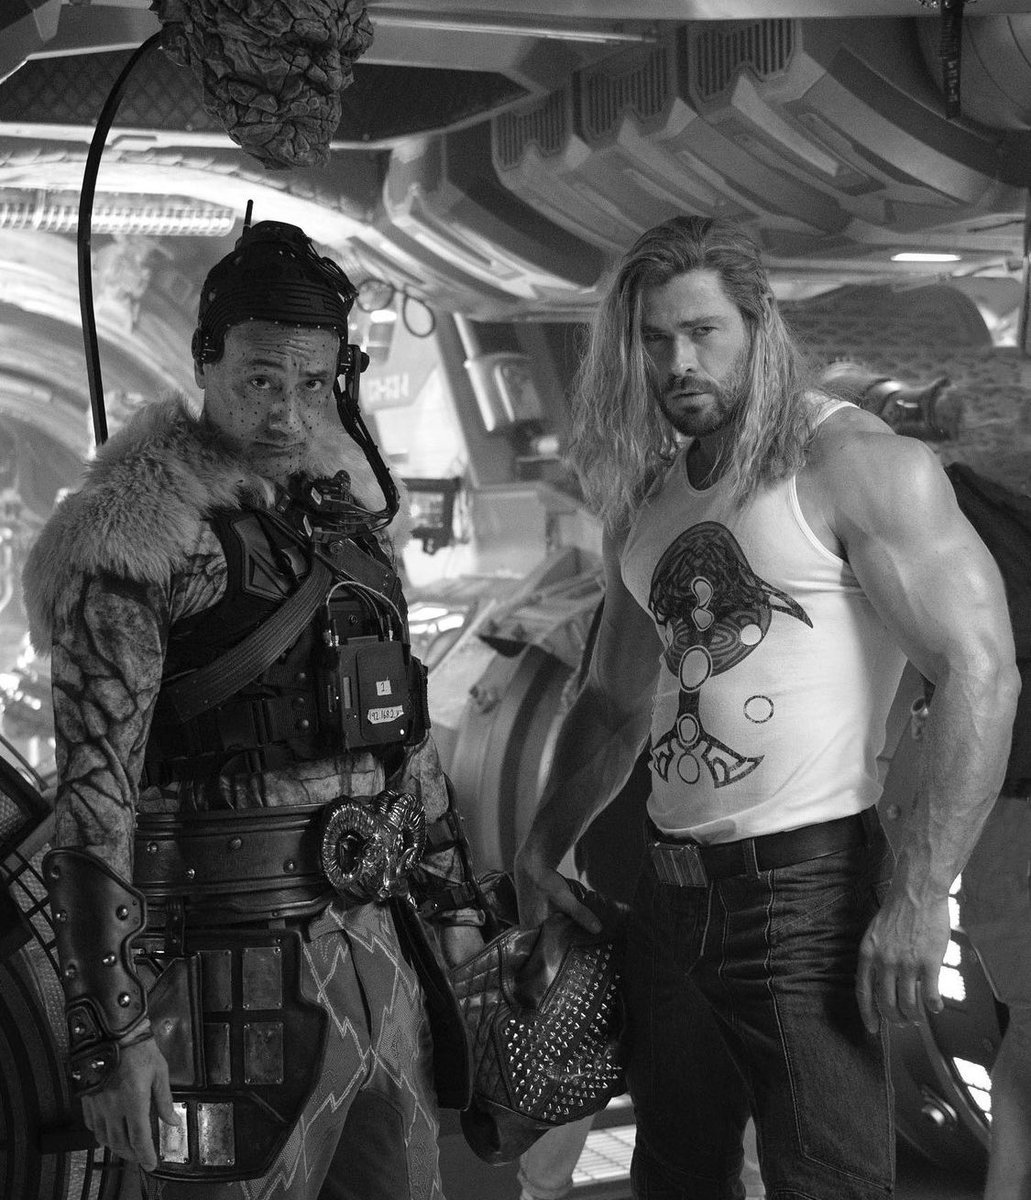 RT @DiscussingFilm: ‘THOR: LOVE AND THUNDER’ has wrapped filming.

The film releases on May 6, 2022 in theaters. https://t.co/HSQvoU05cc